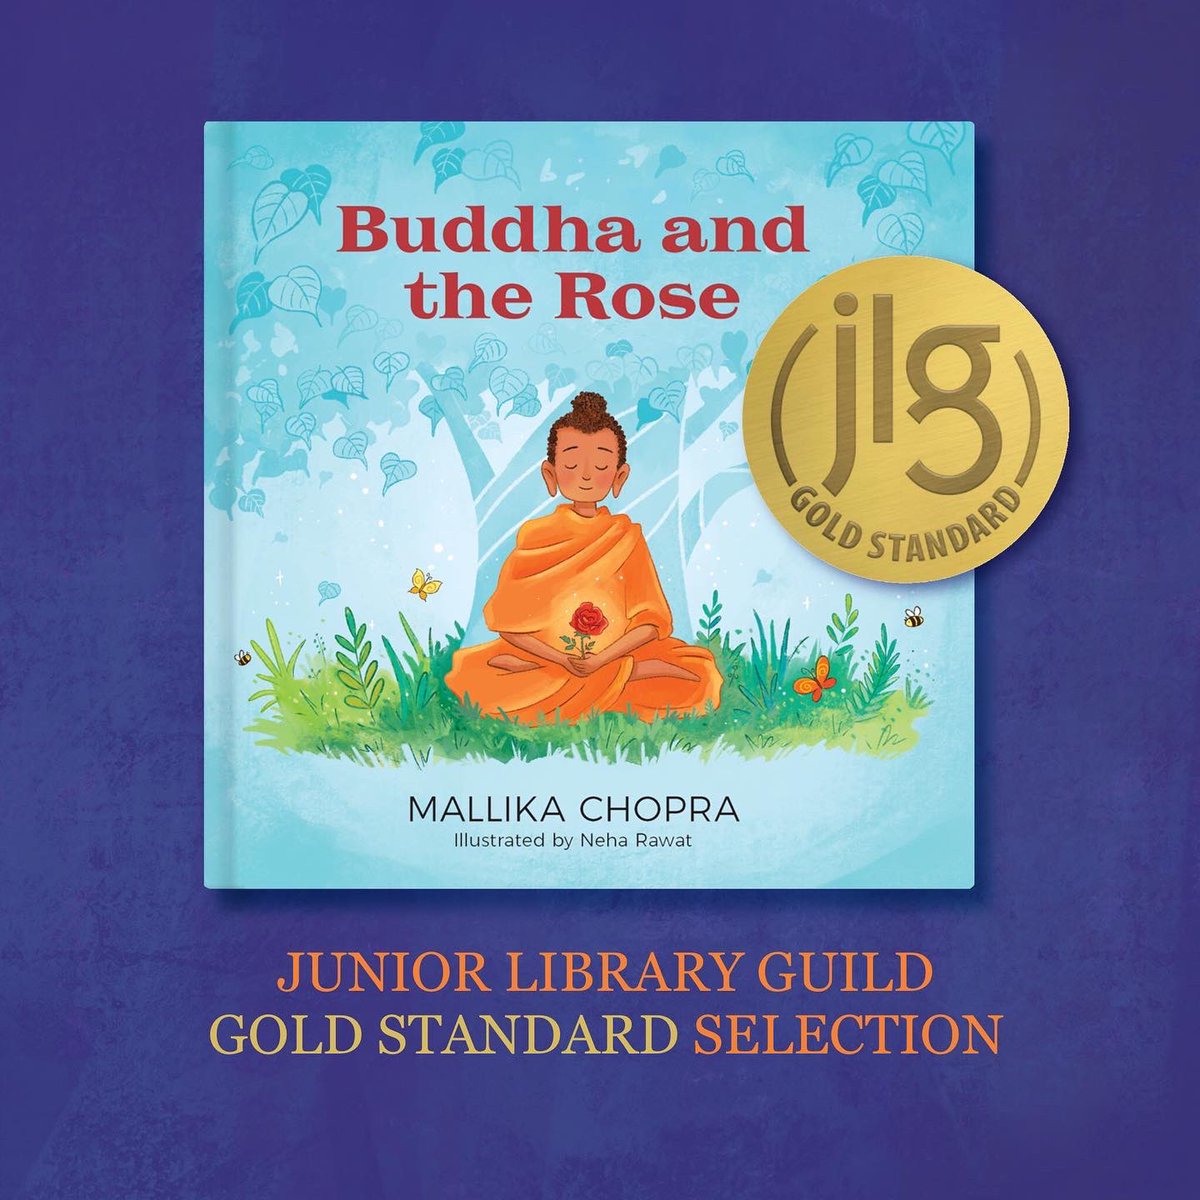 I’m thrilled to announce that BUDDHA AND THE ROSE is a JLG Gold Standard Selection! ✨

Pre-order: hachettebookgroup.com/titles/mallika…

#buddhaandtherose #jlgselection #mindfulnessforkids #welnessforkids #kidlit #kidlitart #picturebooks